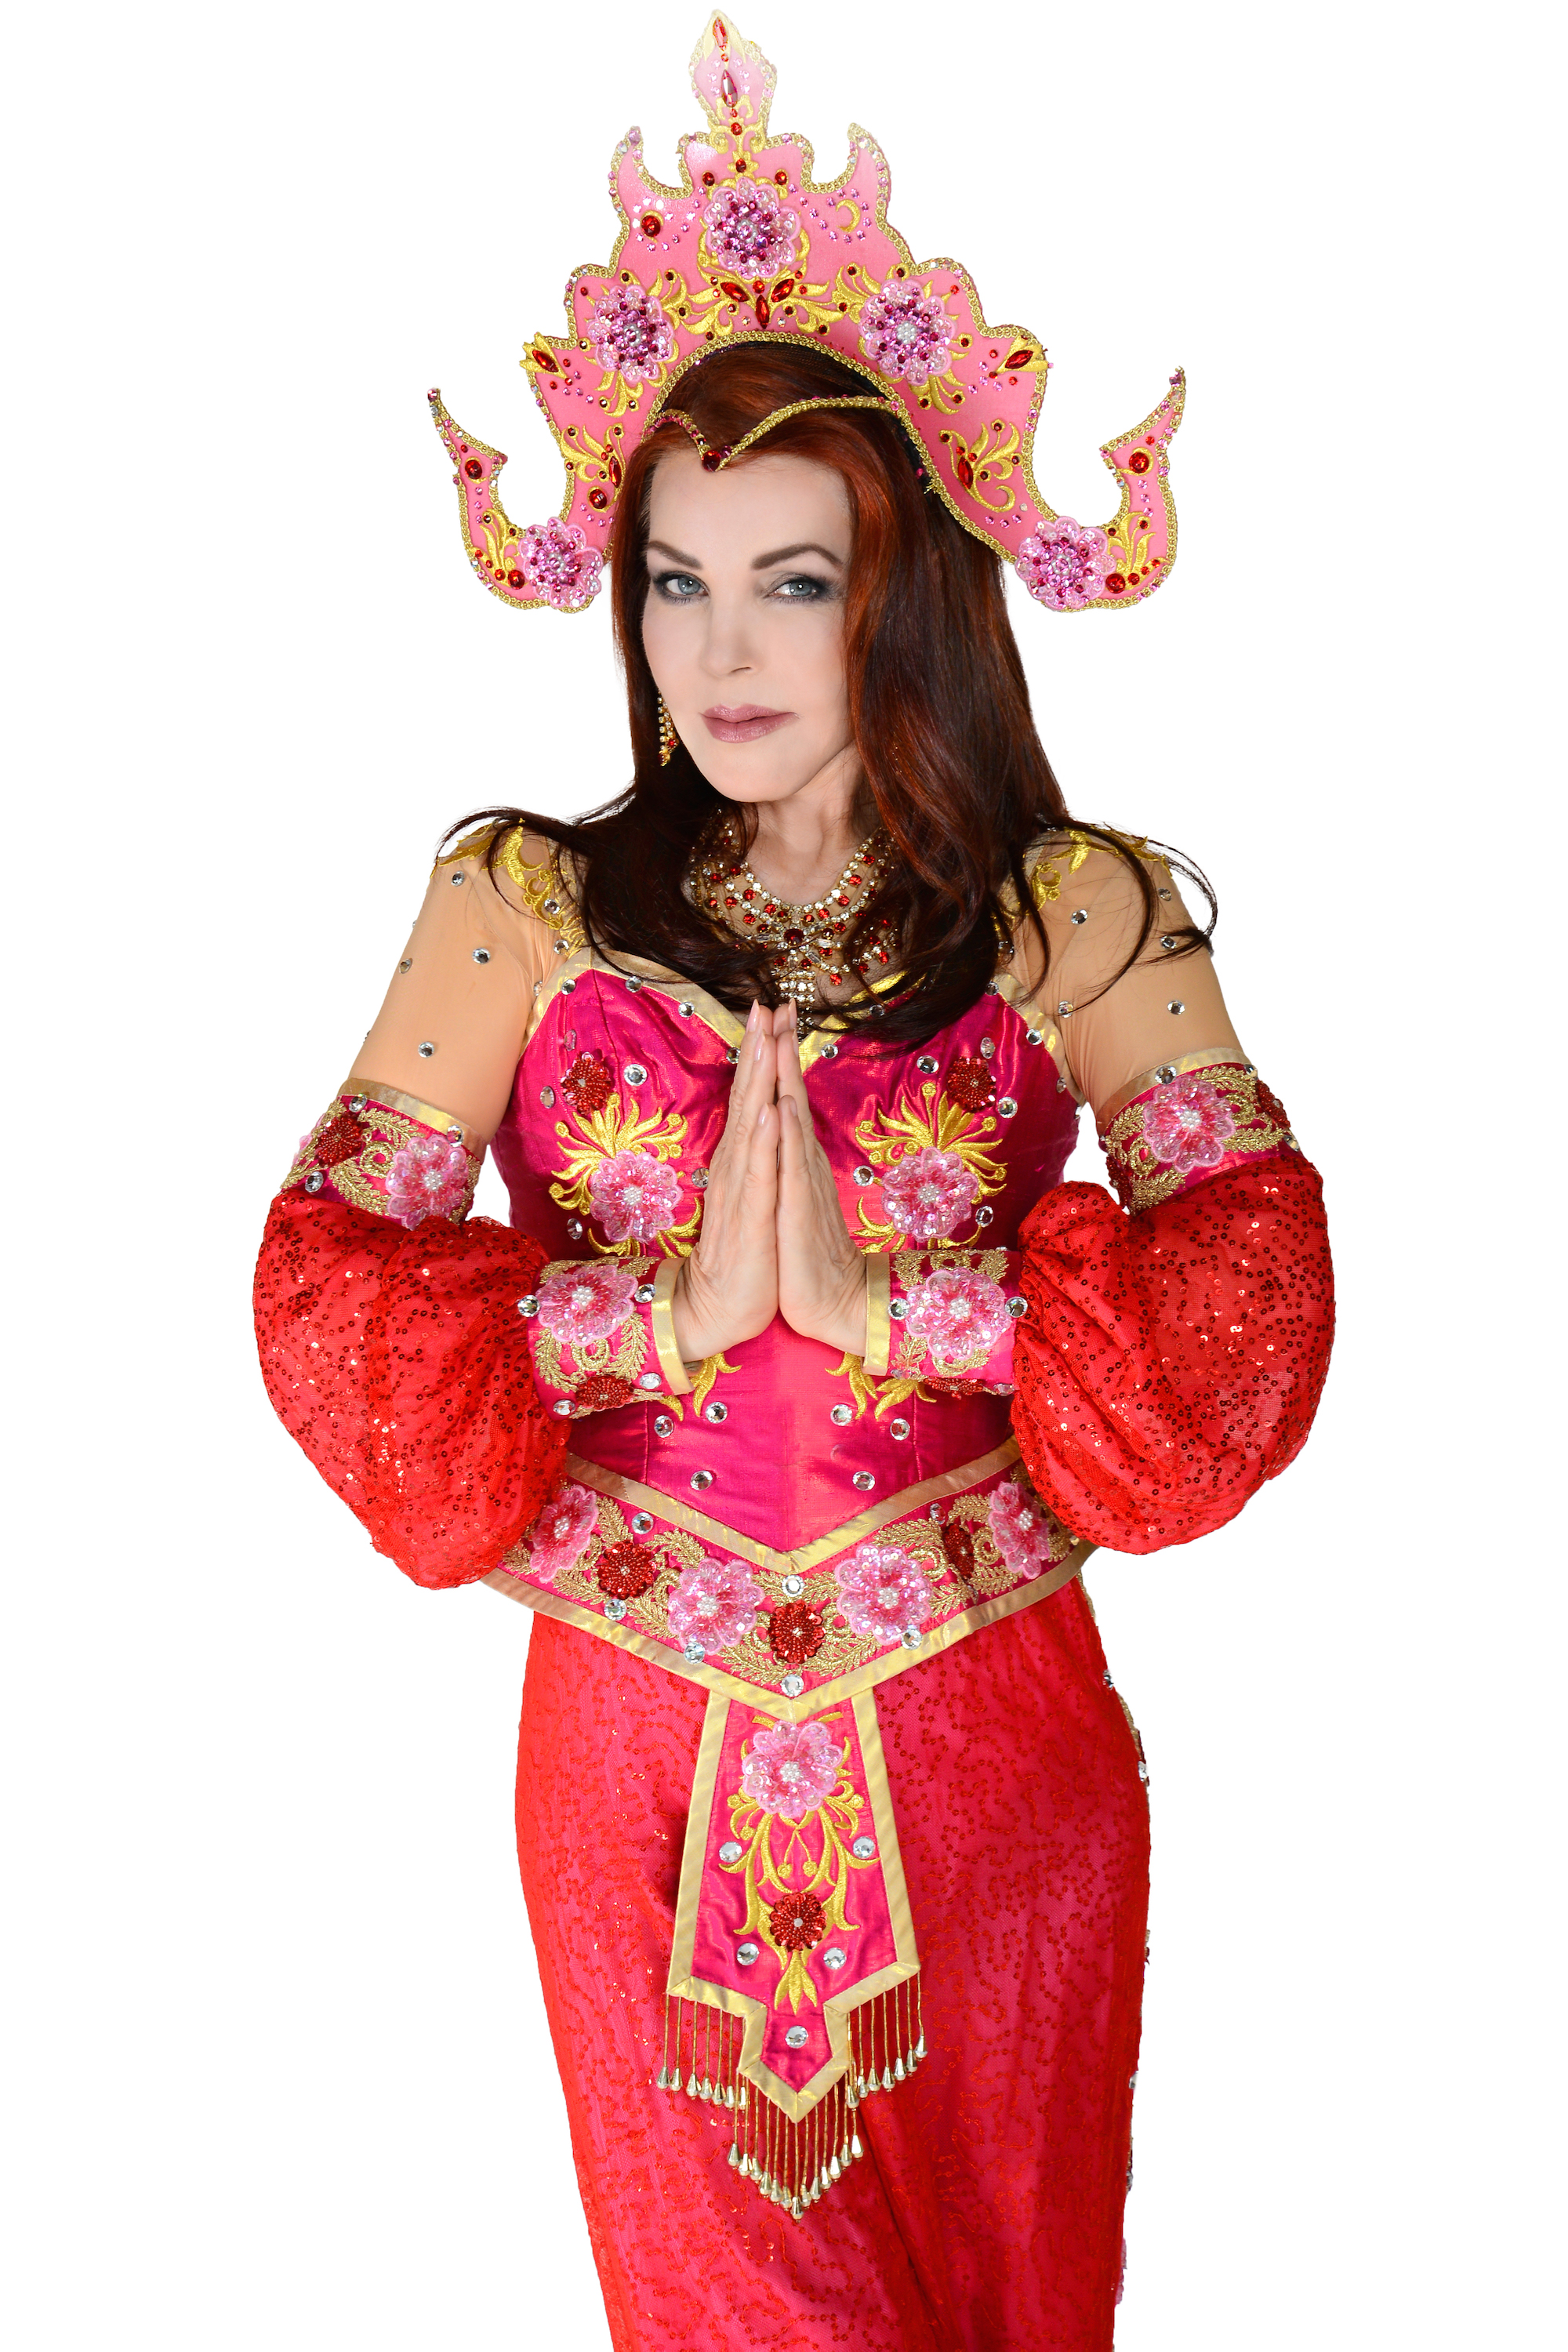 Priscilla Presley shows off her costume as she gears up for panto